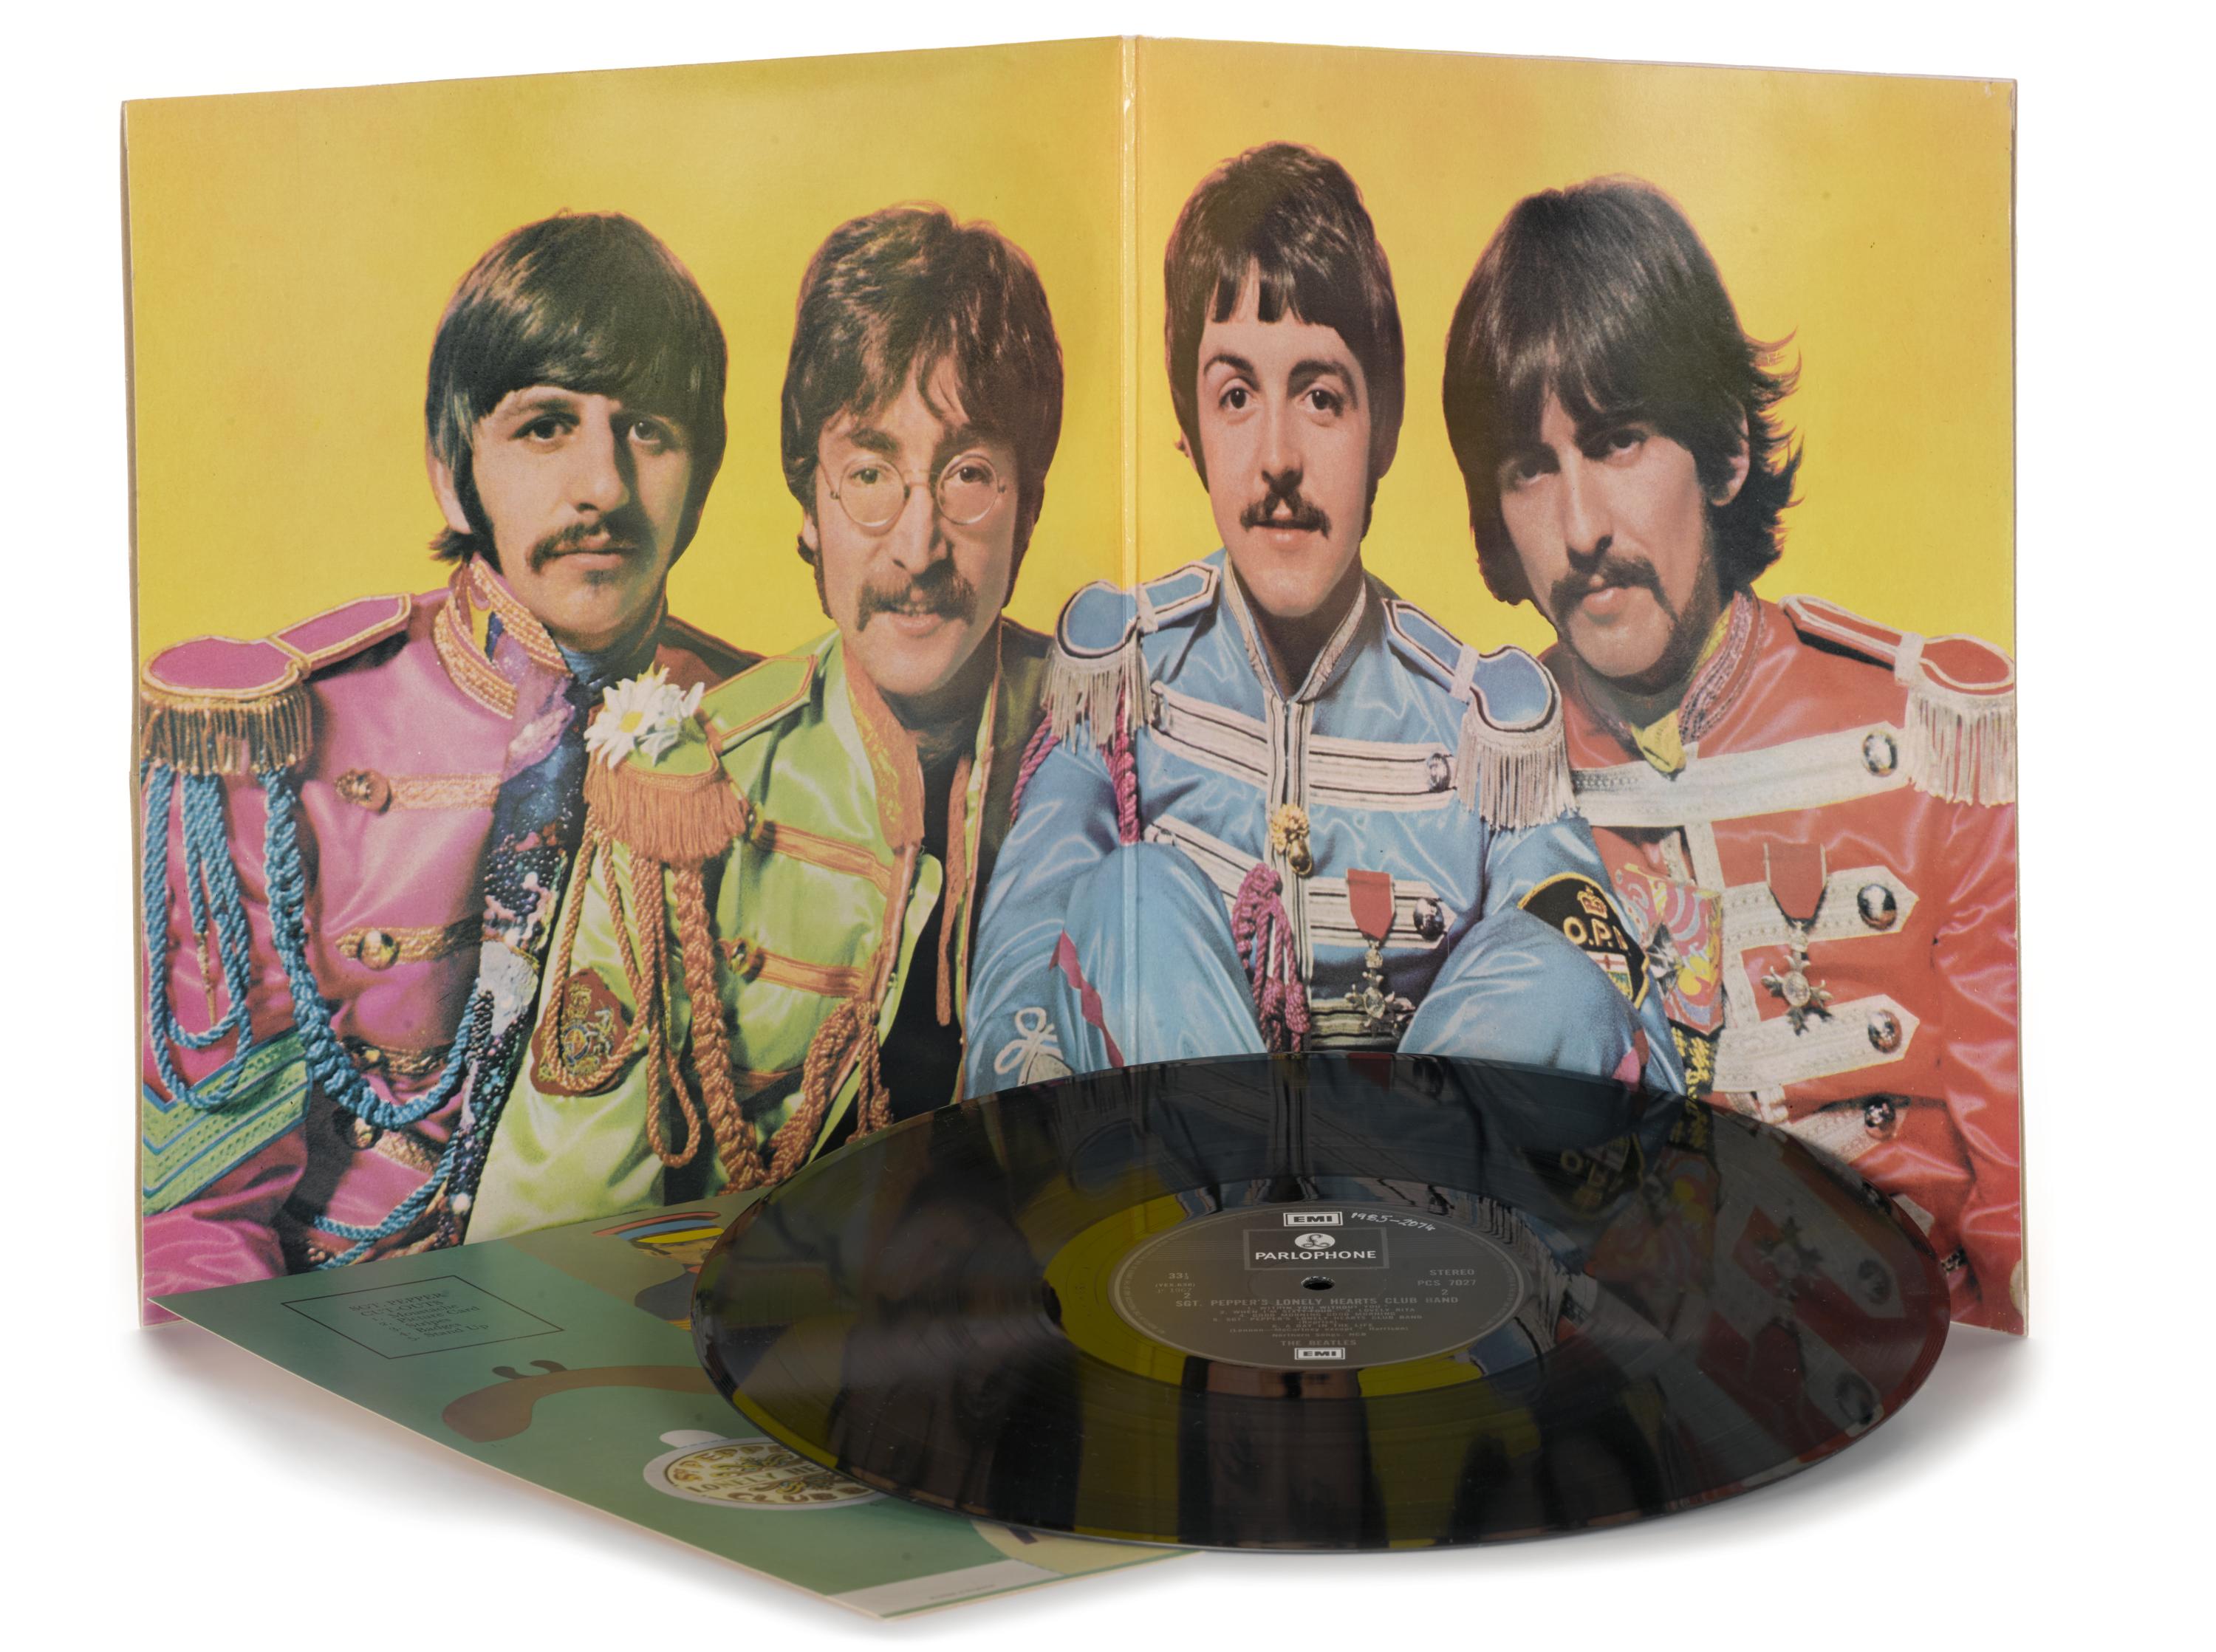 L.P. "Sergeant Pepper's Lonely Hearts Club Band" released by The Beatles in 1967, purchased 1985.